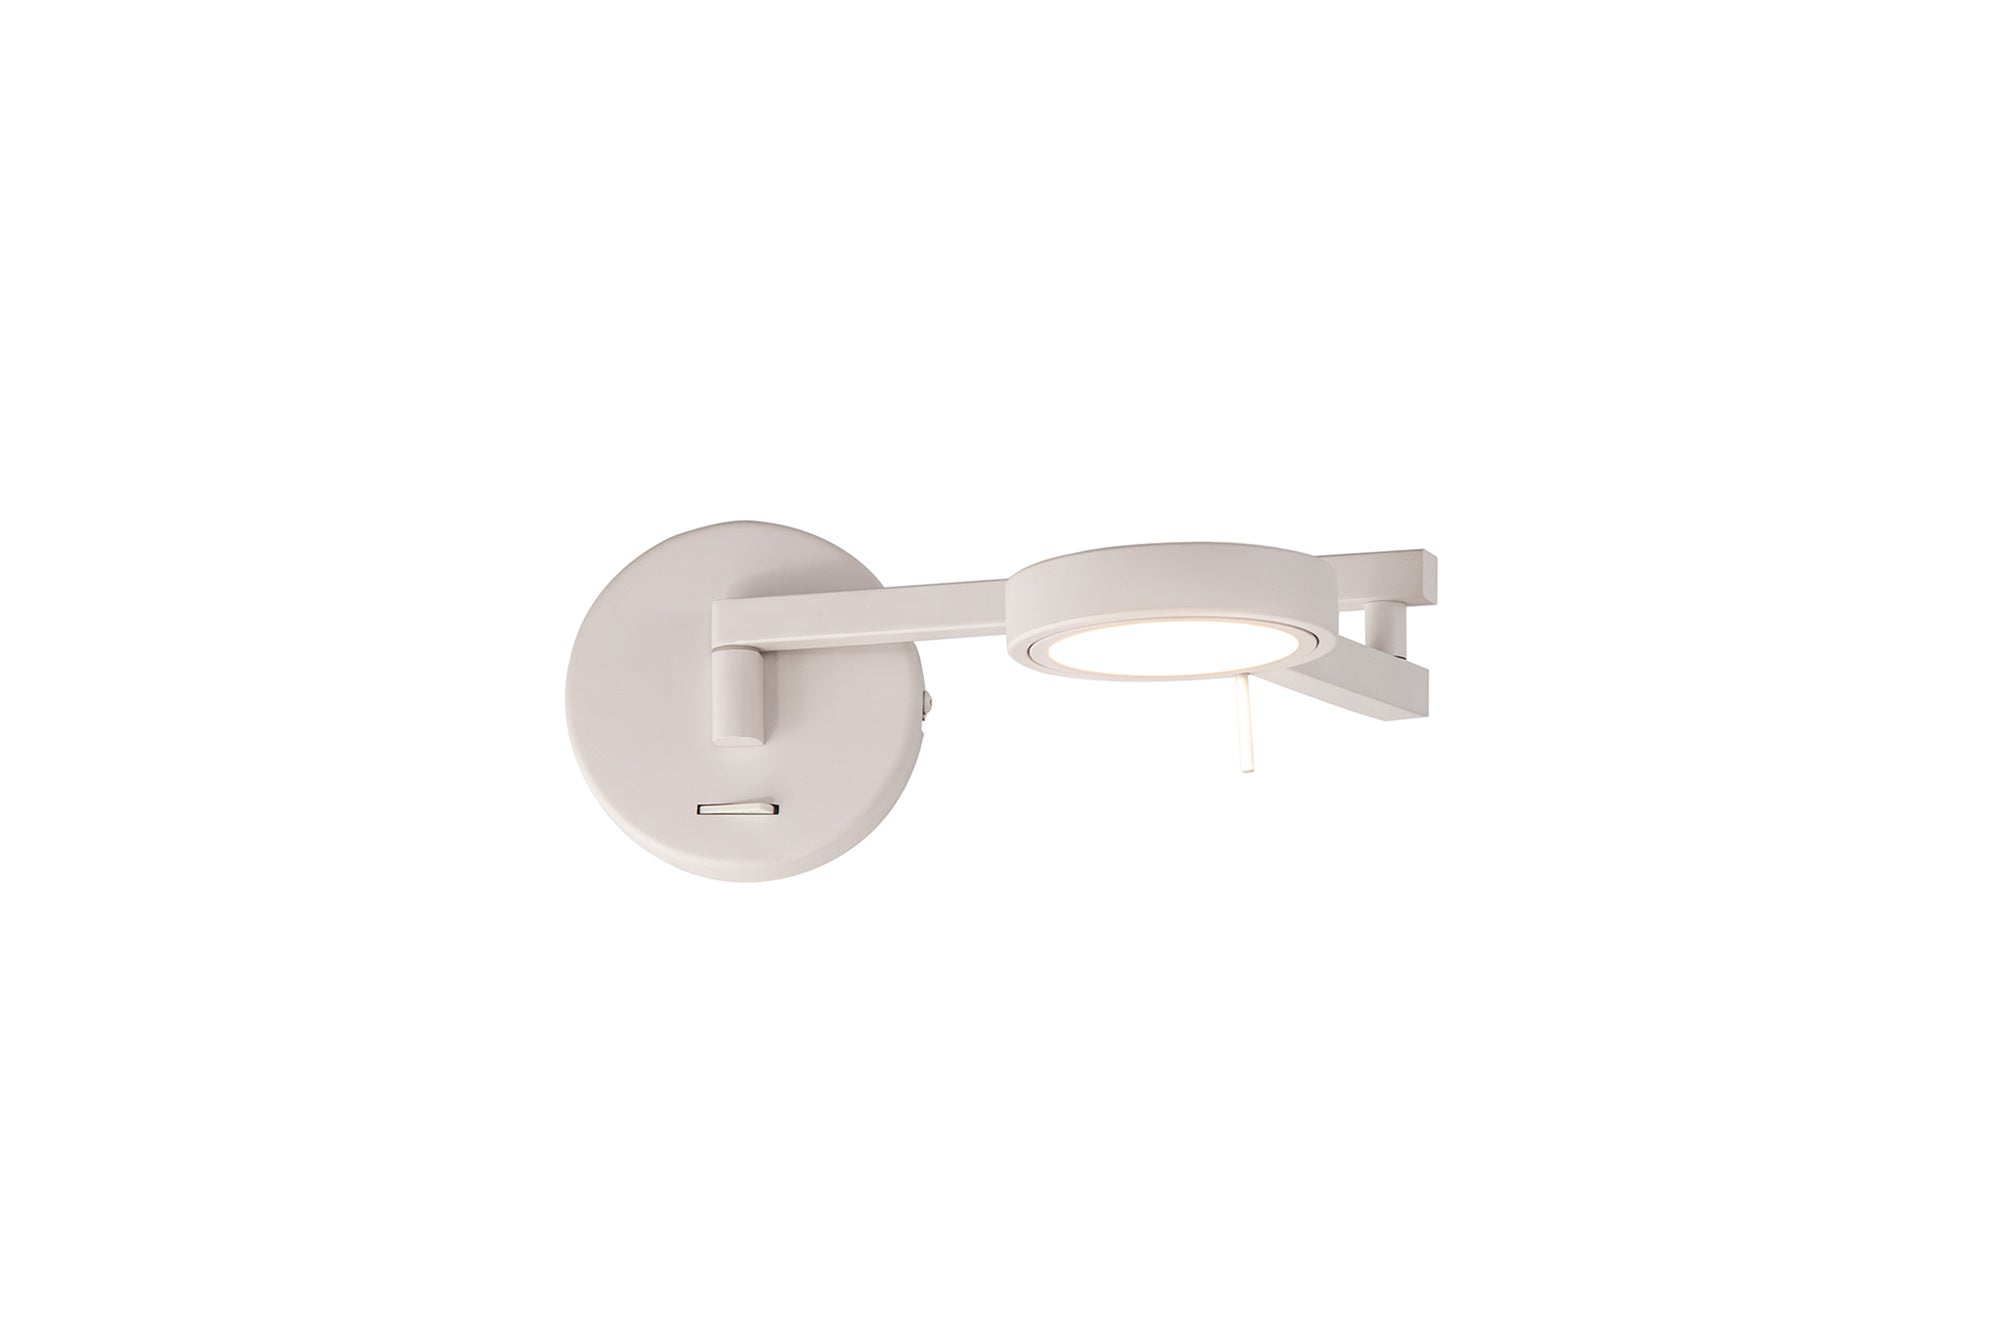 Burley Switched Adjustable Swing Arm Wall Lamp / Reader, 1 x 8W LED, 3000K, Sand White, 3yrs Warranty